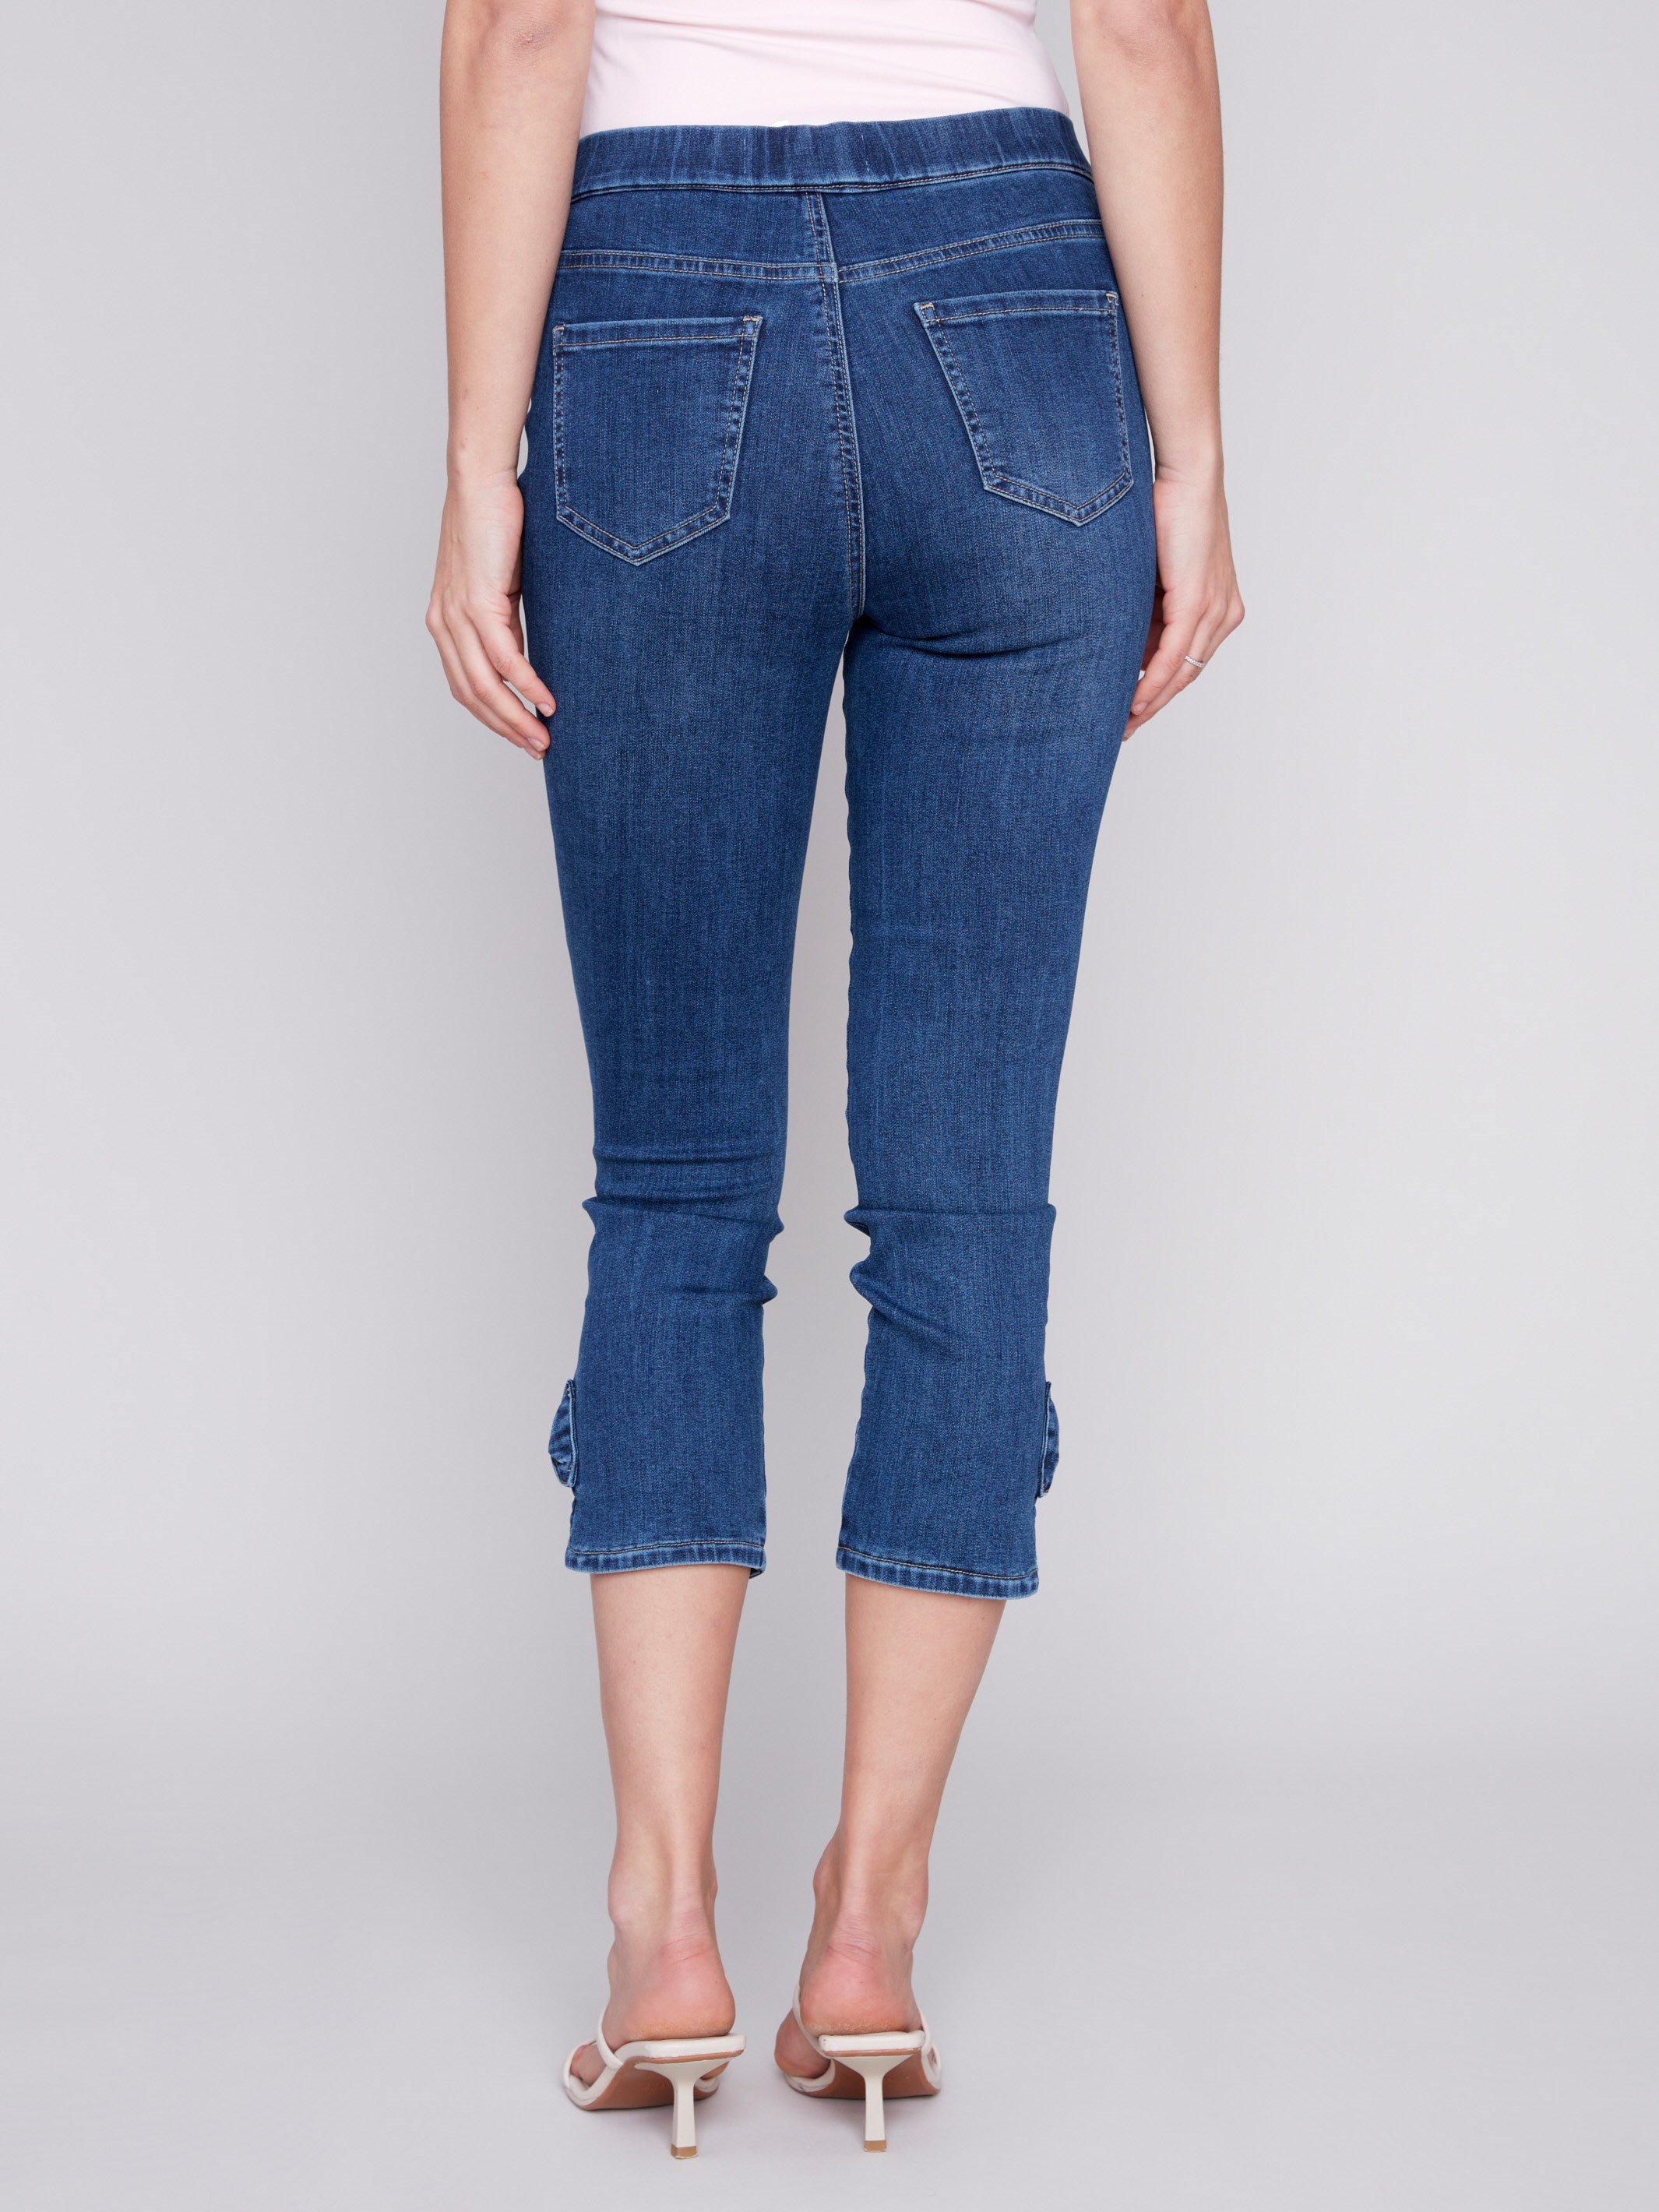 Charlie B Pull-On Jeans with Bow Detail - Indigo - Image 3